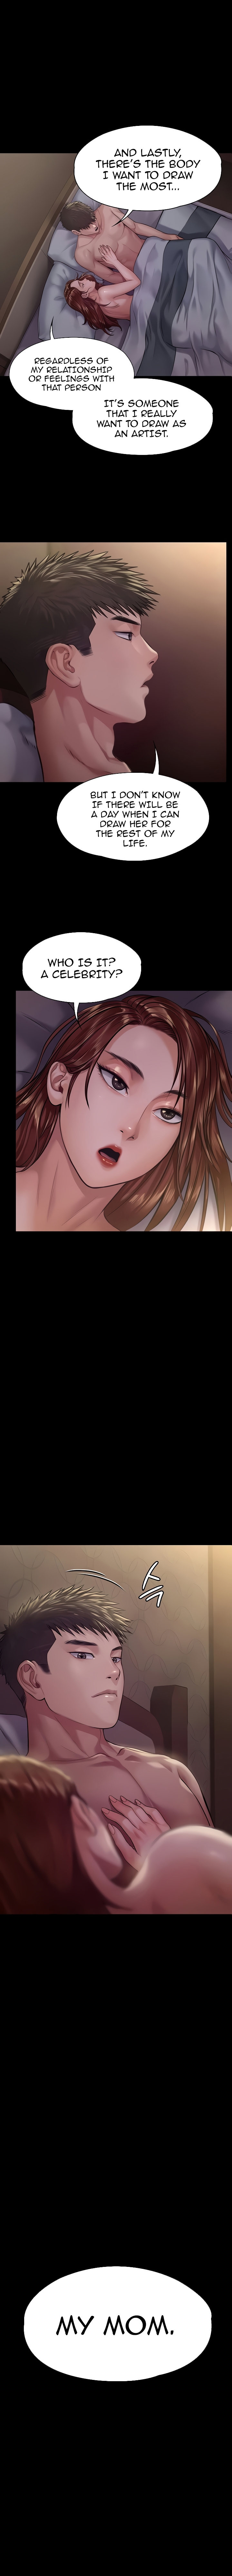 Panel Image 1 for chapter 191 of manhwa Queen Bee on read.oppai.stream